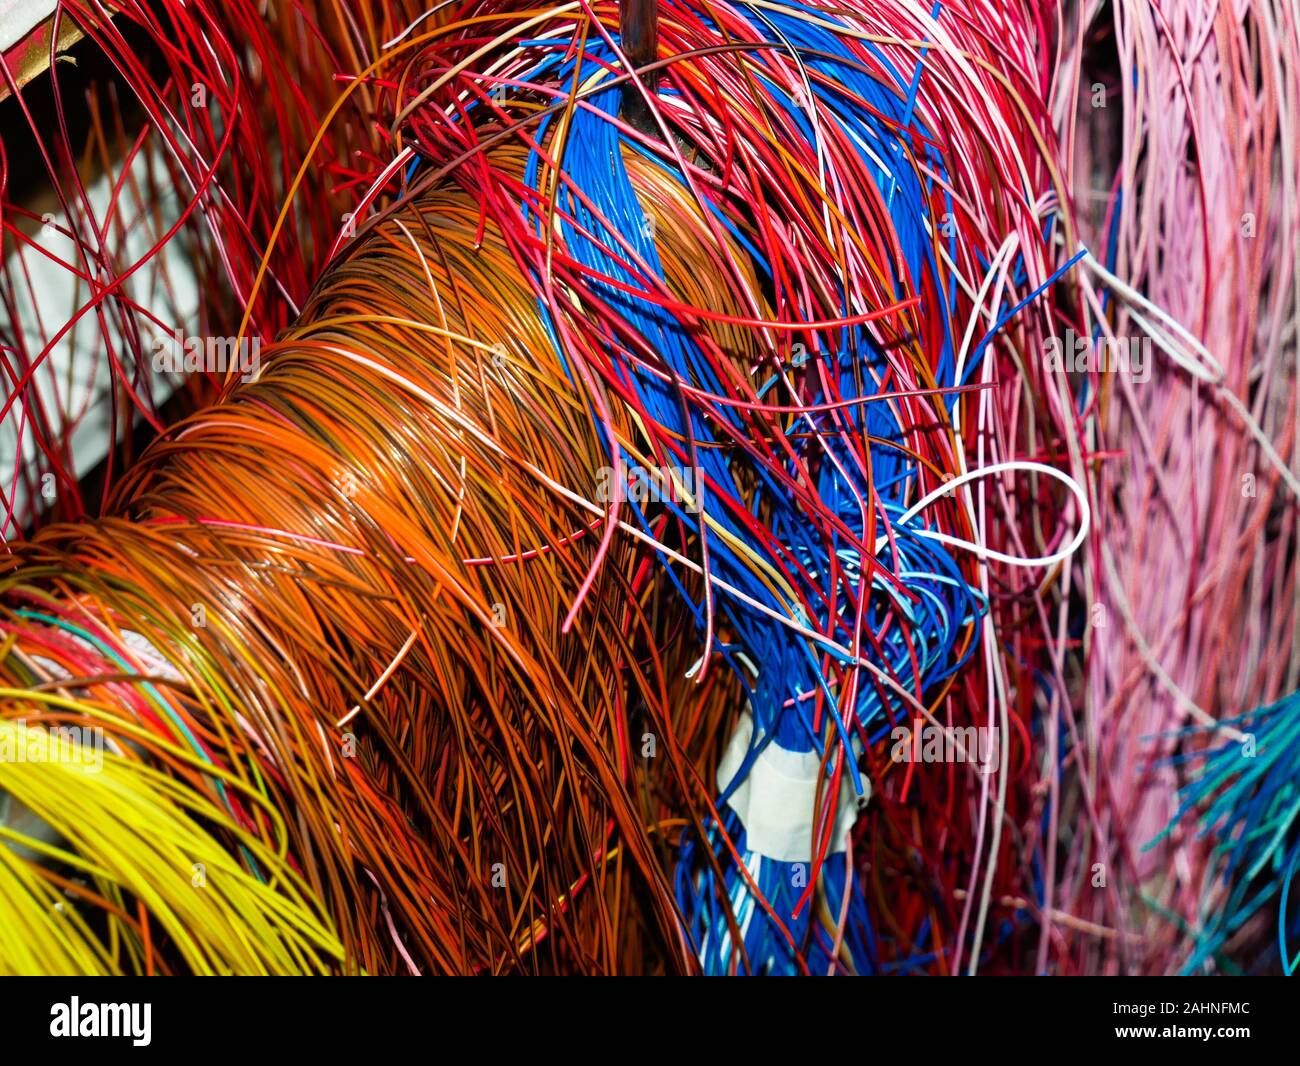 Wien/Austria - june 4 2019: pile of colorful electrical wires used in computers and other appliances sorted on a recycling and recovery compound in vi Stock Photo